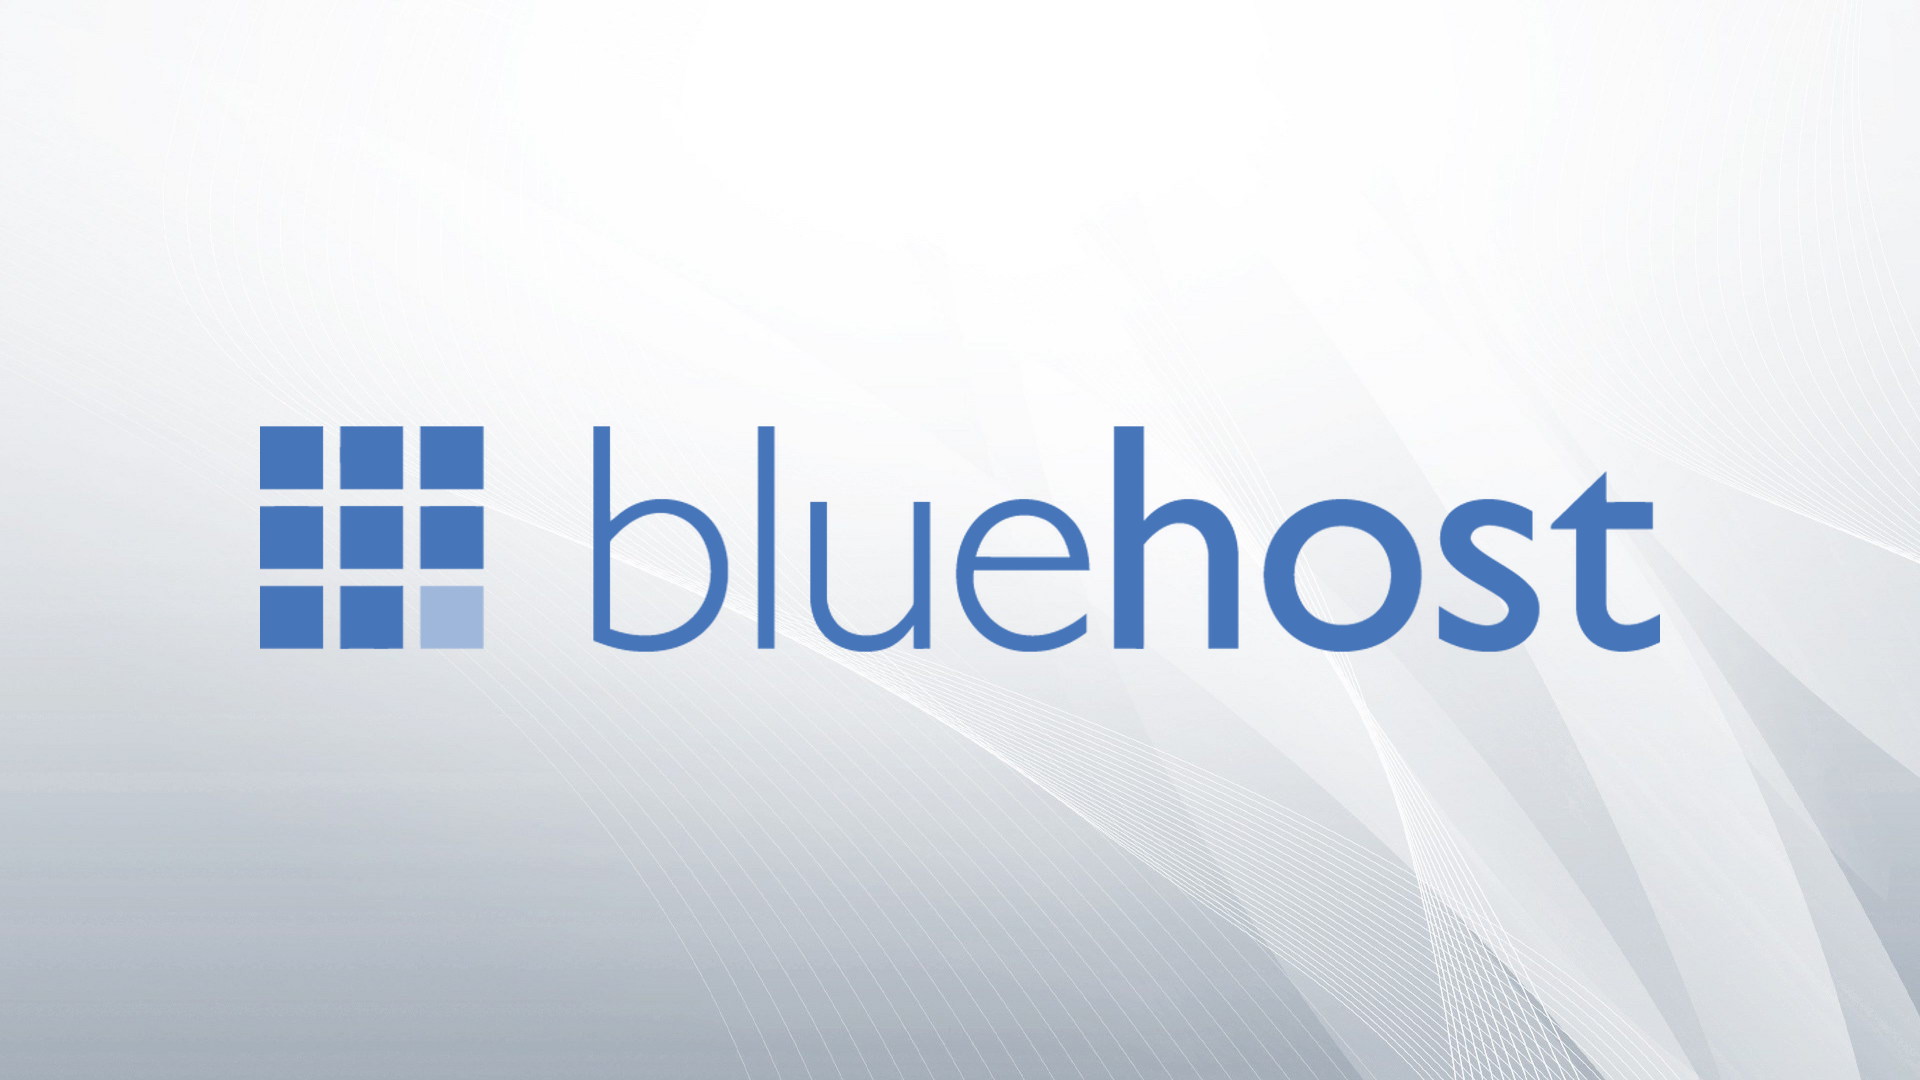 Well hosting. Bluehost. Have Blue. Bluehost logo. "Bluehost Inc"+Минск.